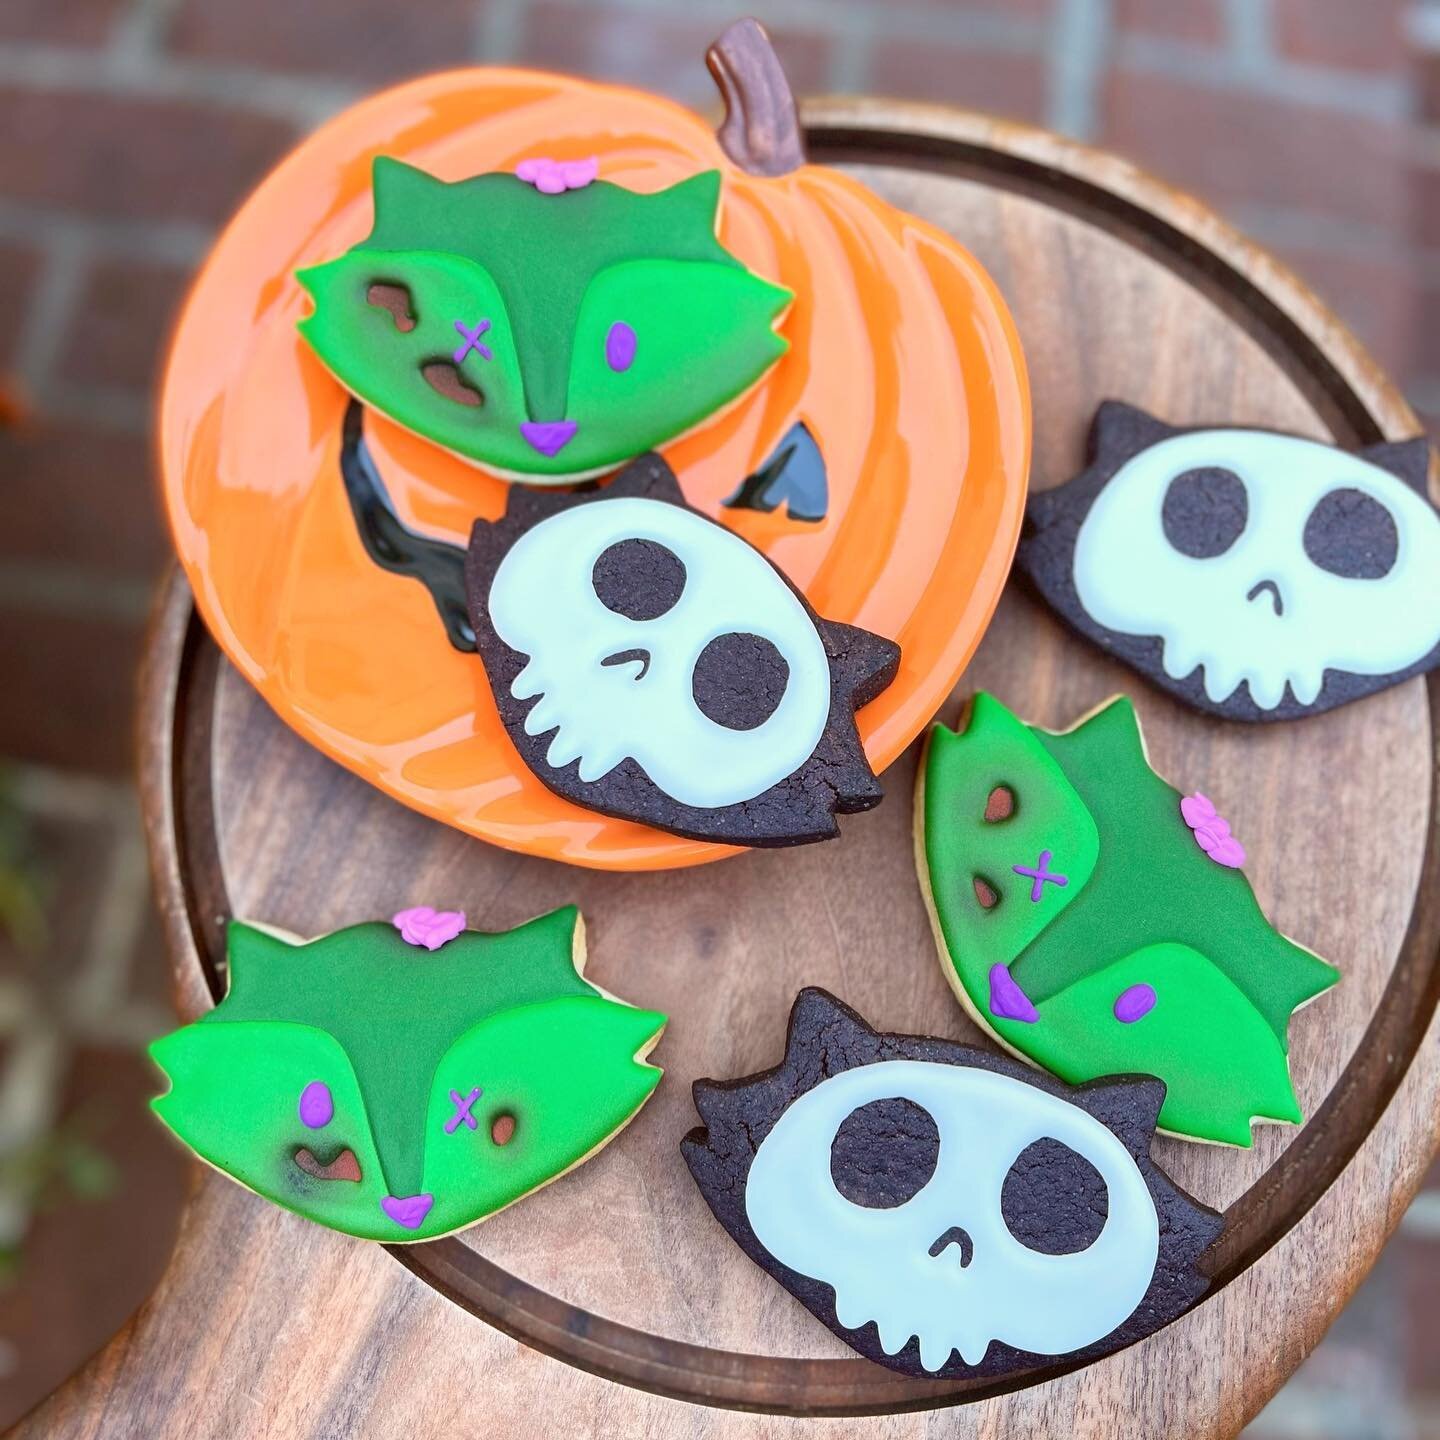 Fox zombie 🧟&zwj;♂️ and fox skull 💀 cookies make their triumphantly spooky return today! 🦊🎃🍂 Made &amp; photographed by @flour.dusted 

(The zombies are sugar cookies and the skulls are chocolate sugar cookies). 

#eatbrains #zombies #skulls #ha